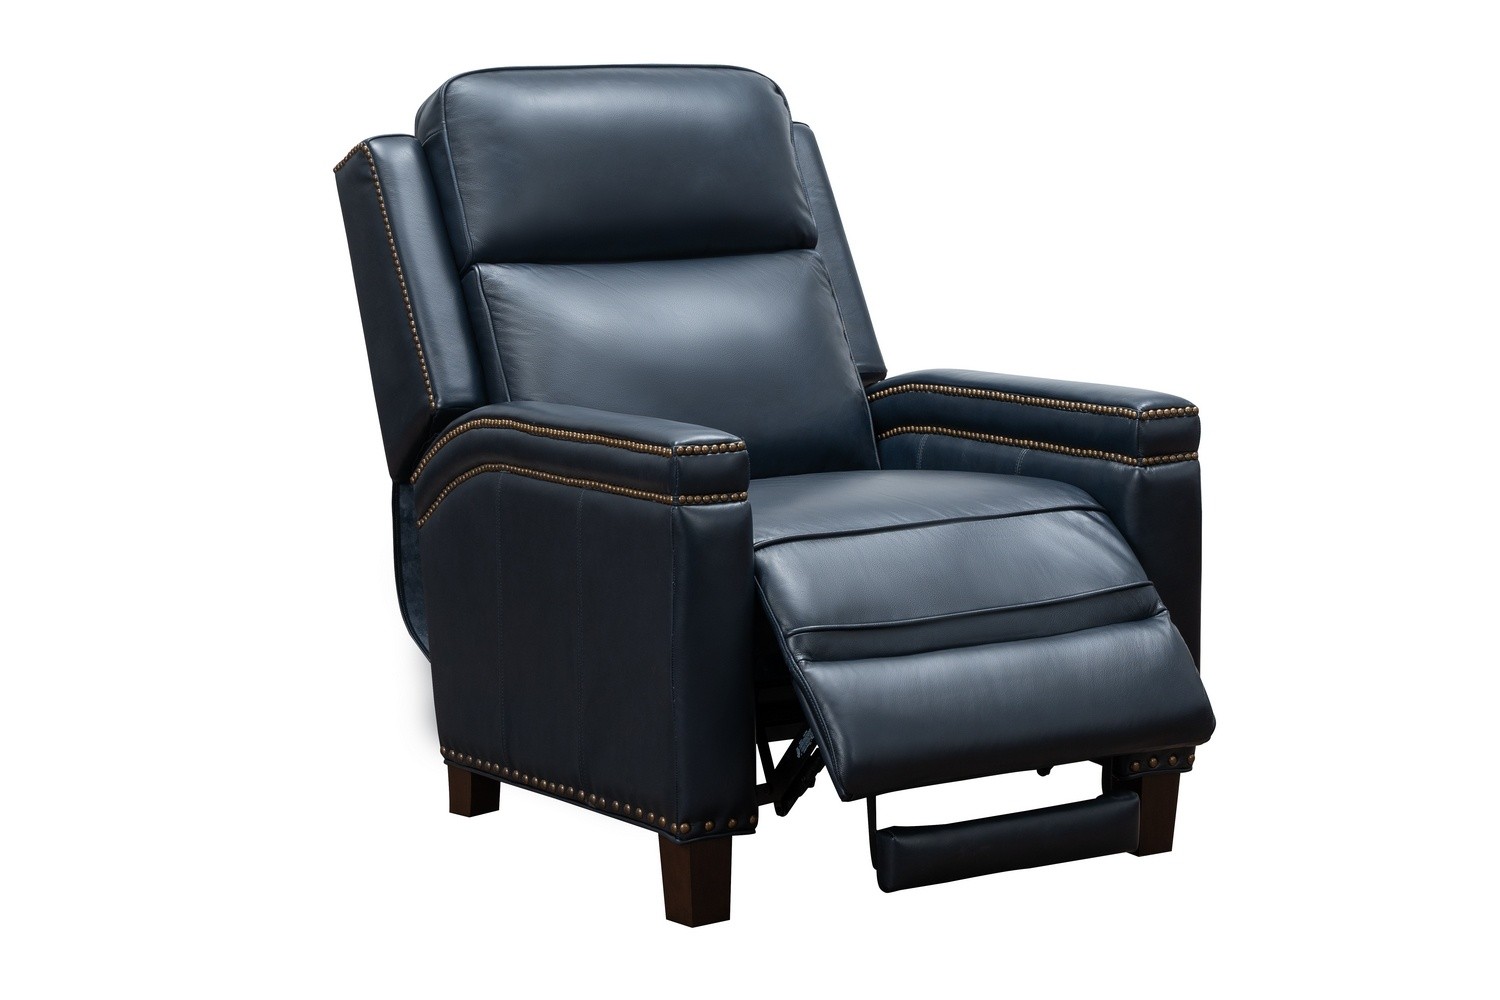 Barcalounger Smithfield Big and Tall Recliner Chair - Shoreham Blue/All Leather